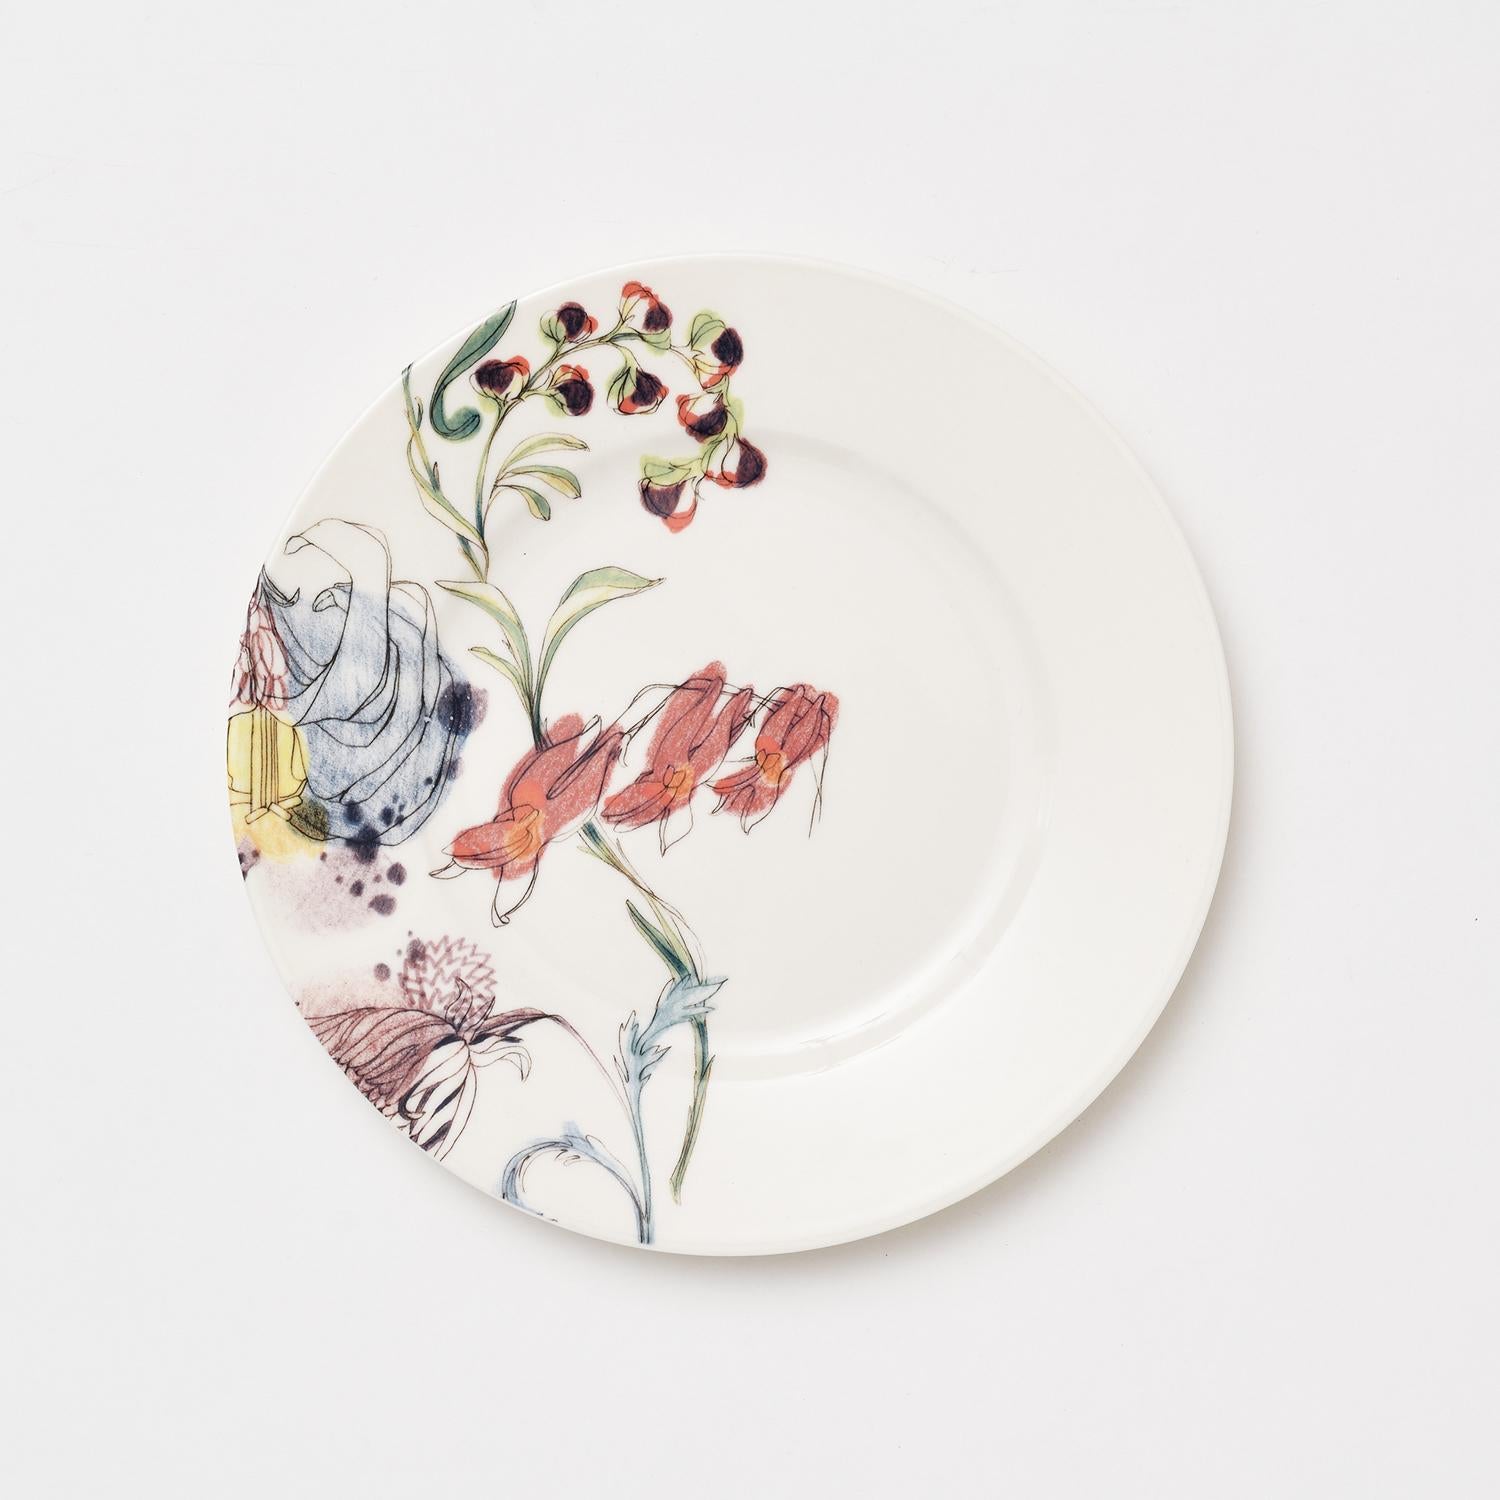 Belonging to the Grandma's garden porcelain series, the design of these dessert plates represents a sophisticated and elegant floral designs full of blossoms and buds with delicate colors blending together for a fresh and contemporary look, typical